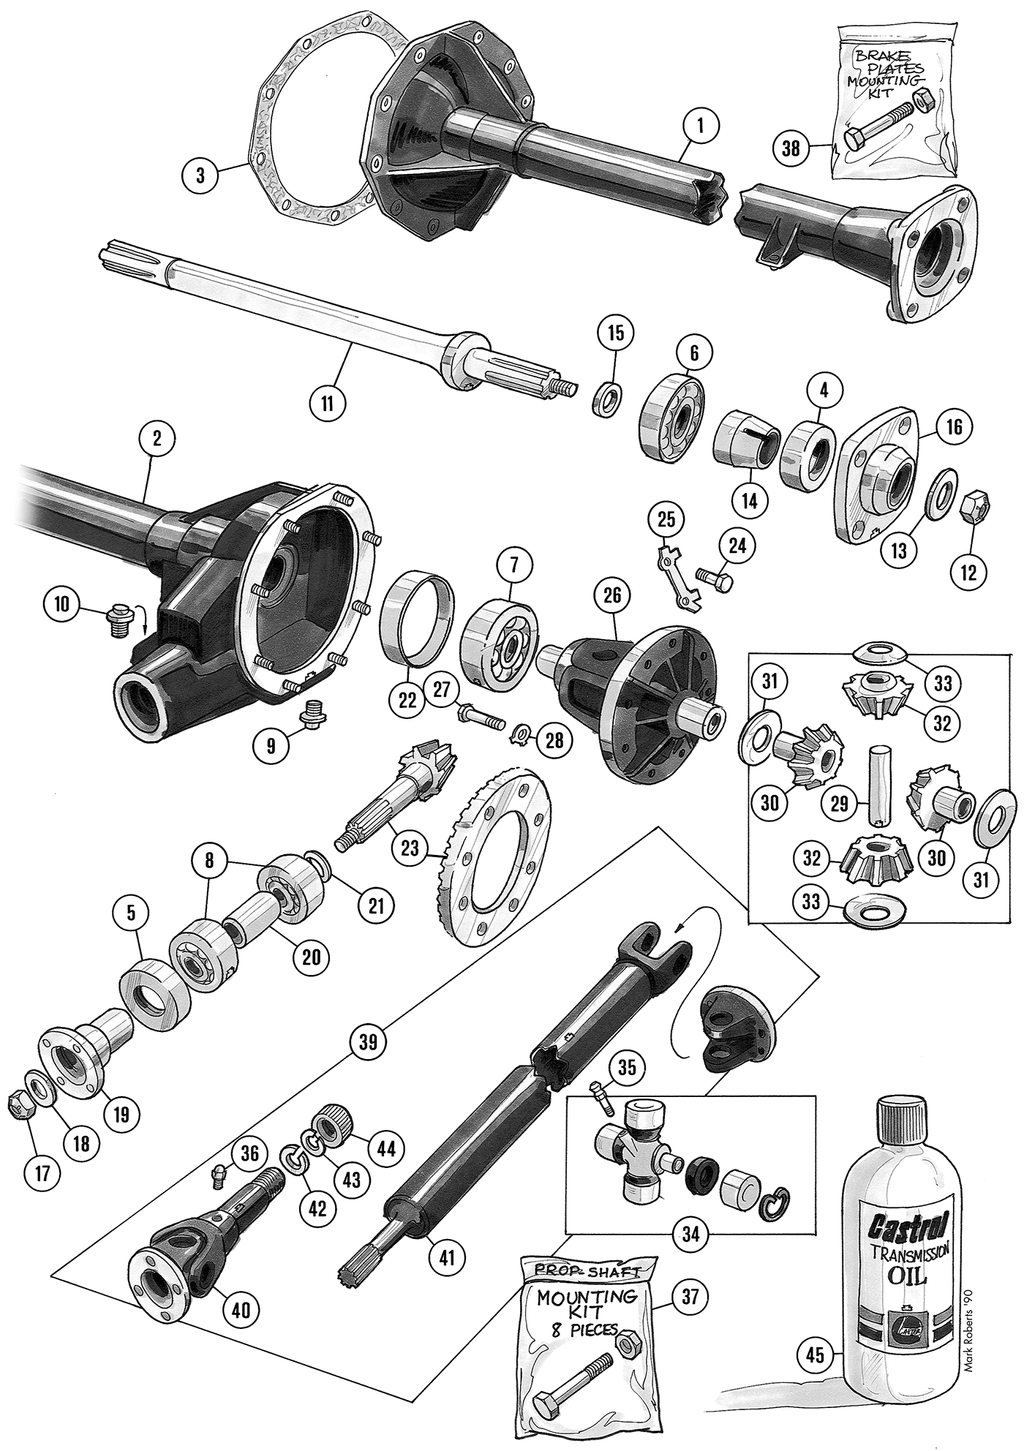 MGTD-TF 1949-1955 - Universal joint | Webshop Anglo Parts - 1